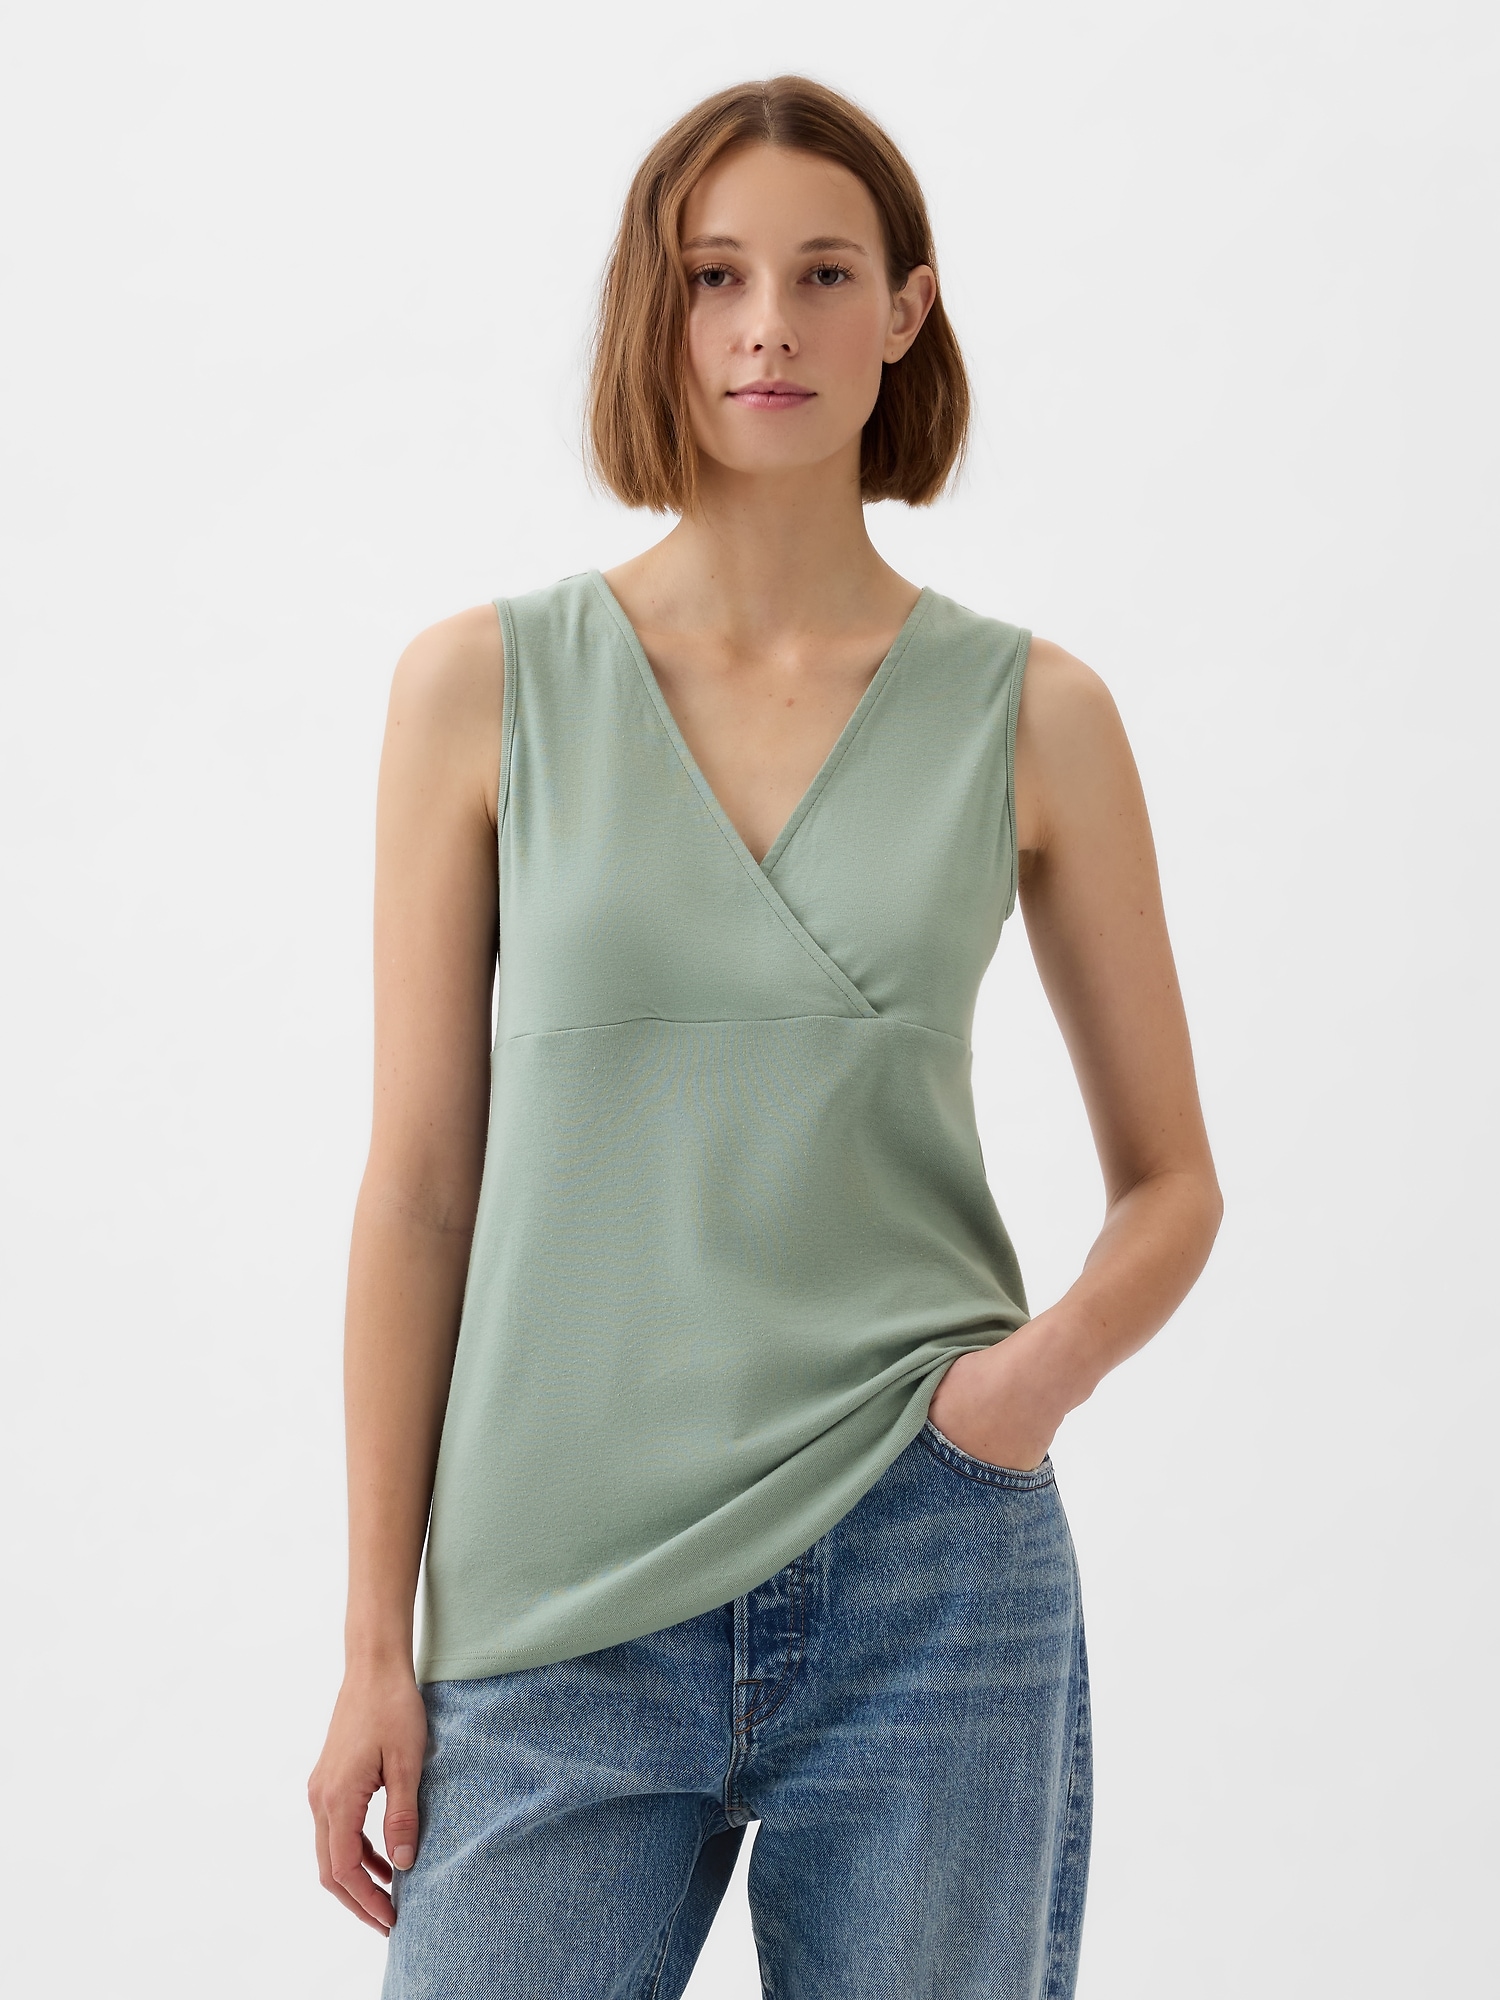 Women's Maternity Nursing Camisole made with Organic Cotton